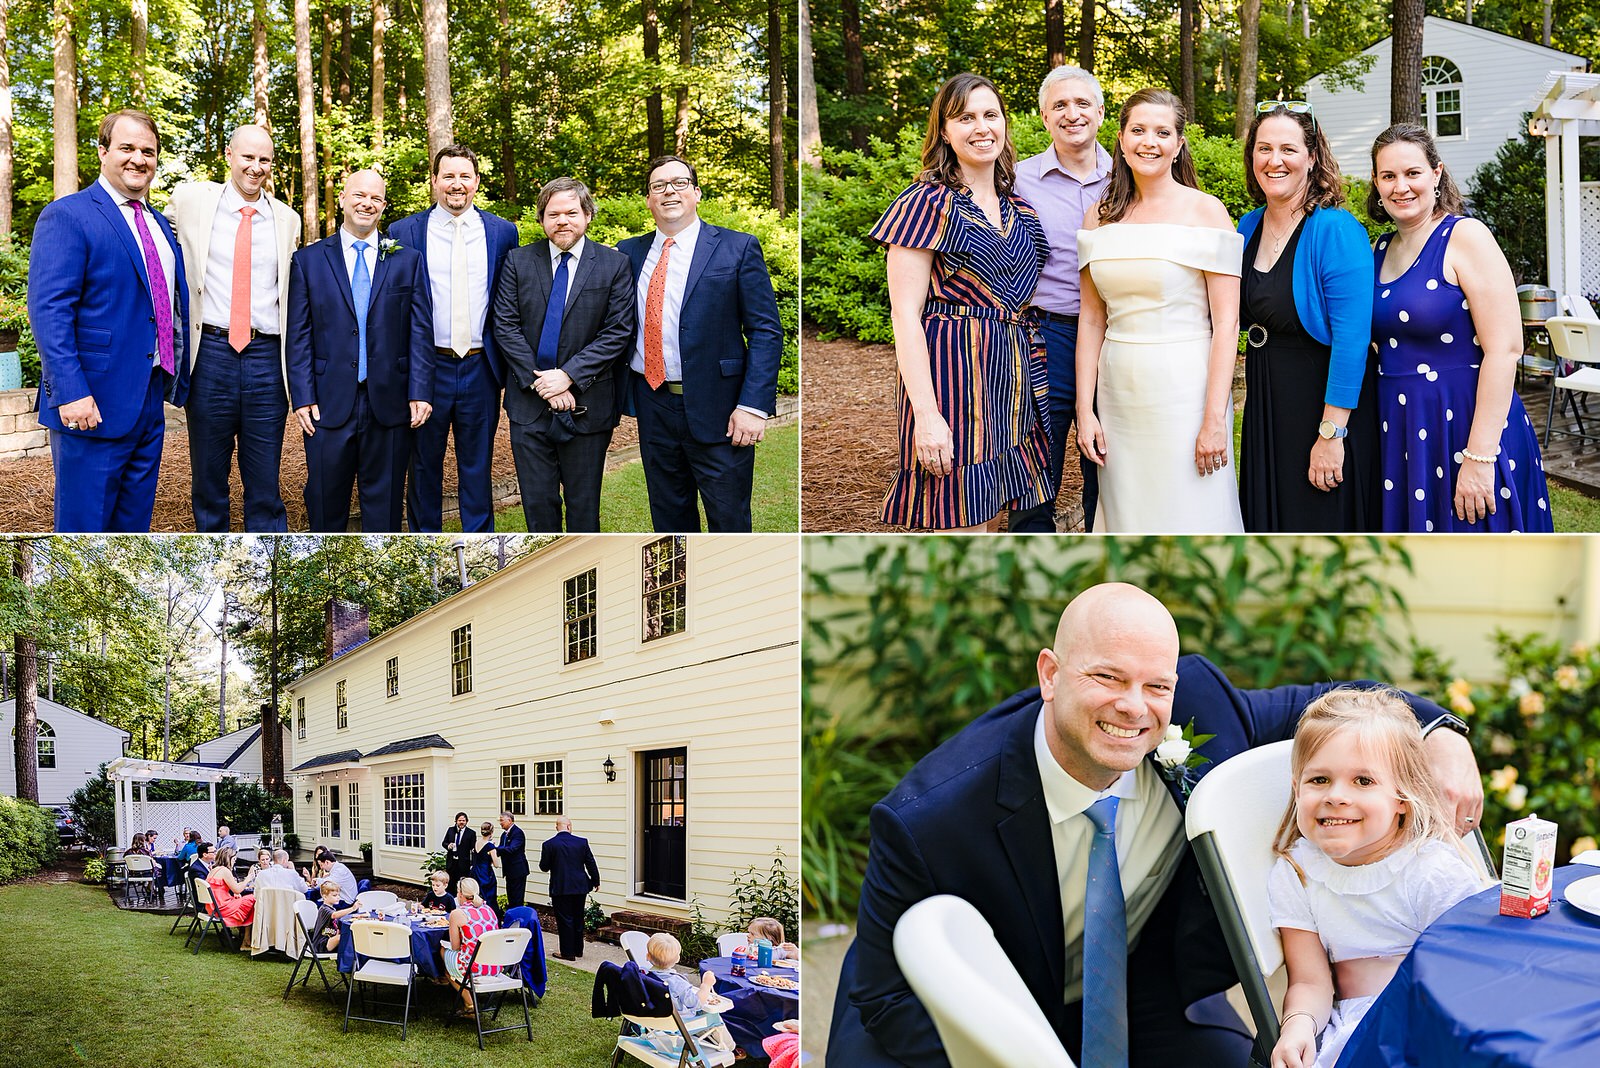 Photos of guests at a micro-wedding in a Raleigh backyard